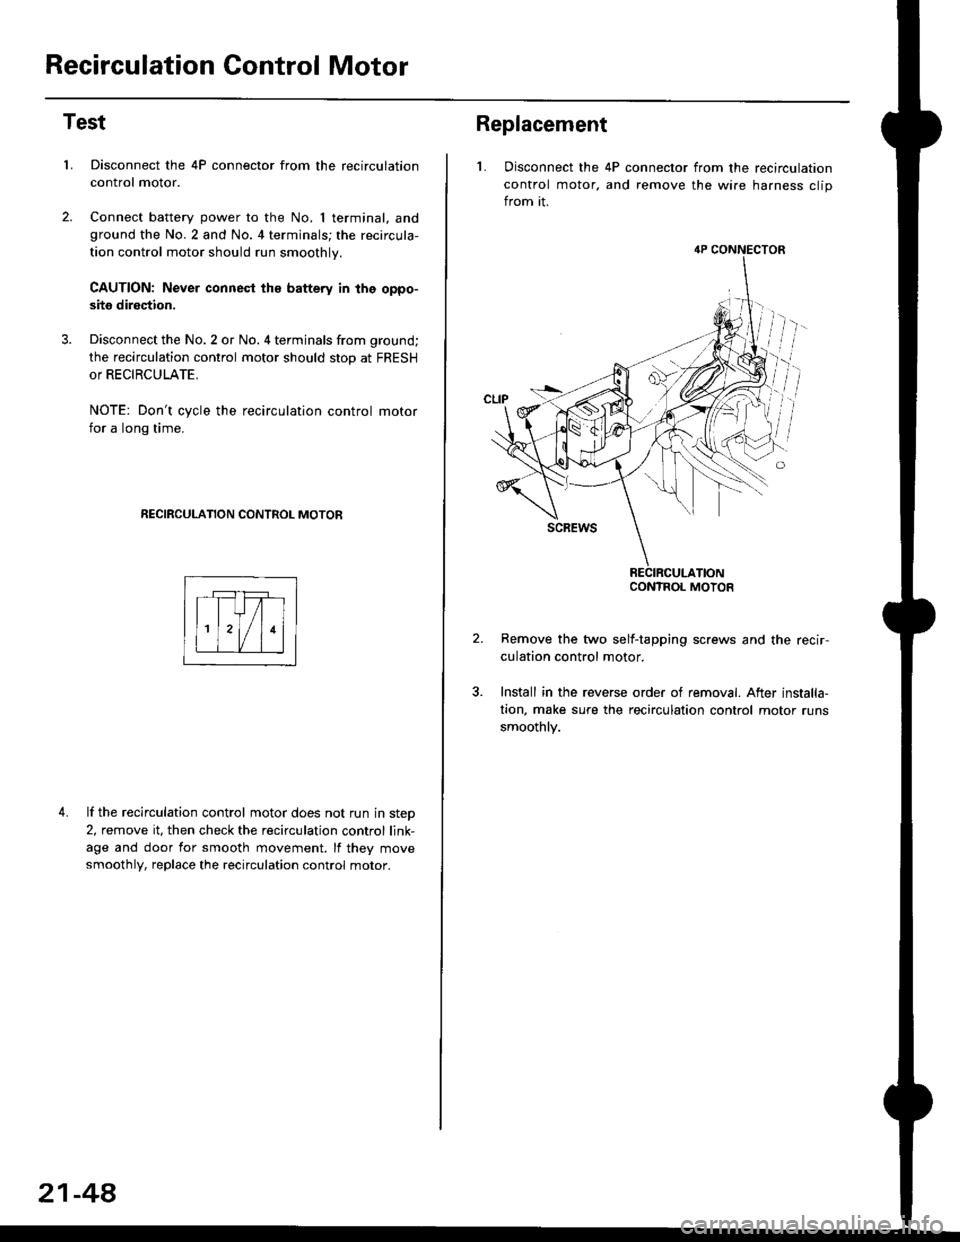 HONDA CIVIC 1999 6.G Workshop Manual Recirculation Control Motor
Test
LDisconnect the 4P connector from the recirculation
control motor.
Connect battery power to the No. I terminal, andground the No.2 and No. 4 terminals; the recircula-
